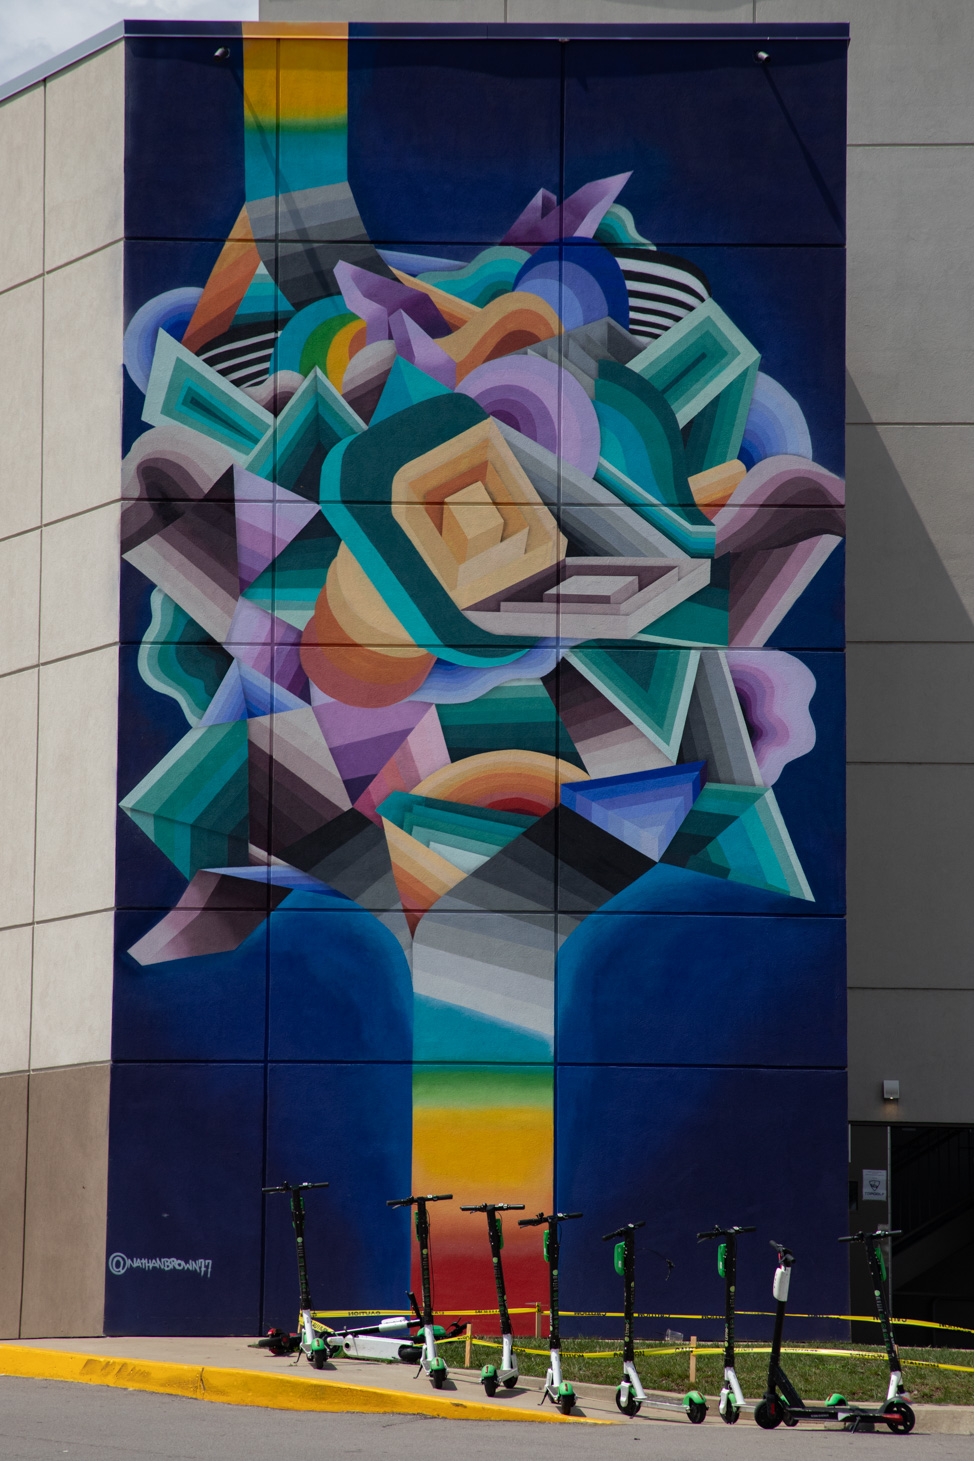 Top Golf Nashville mural by Nathan Brown